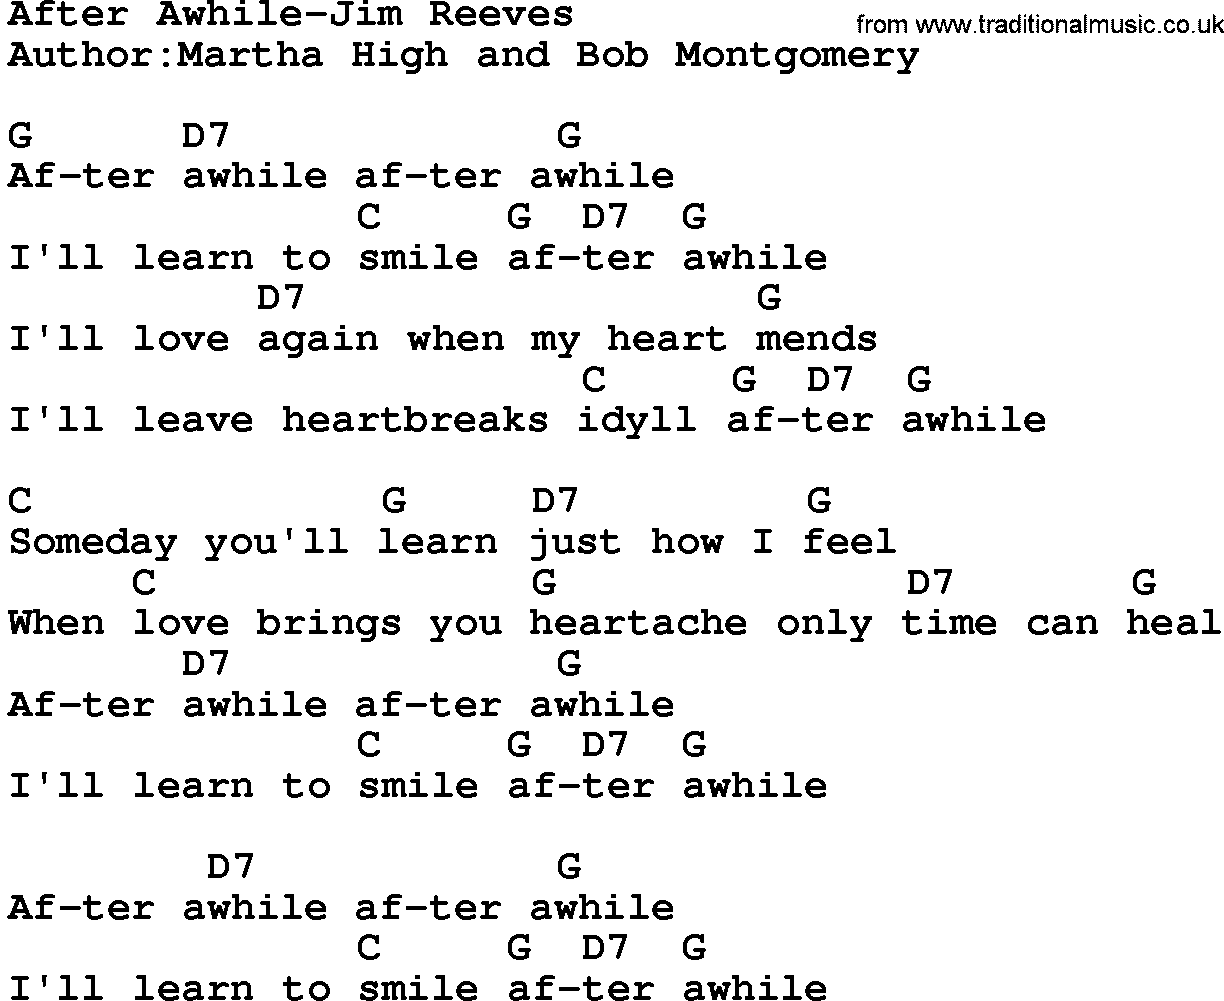 Country music song: After Awhile-Jim Reeves lyrics and chords